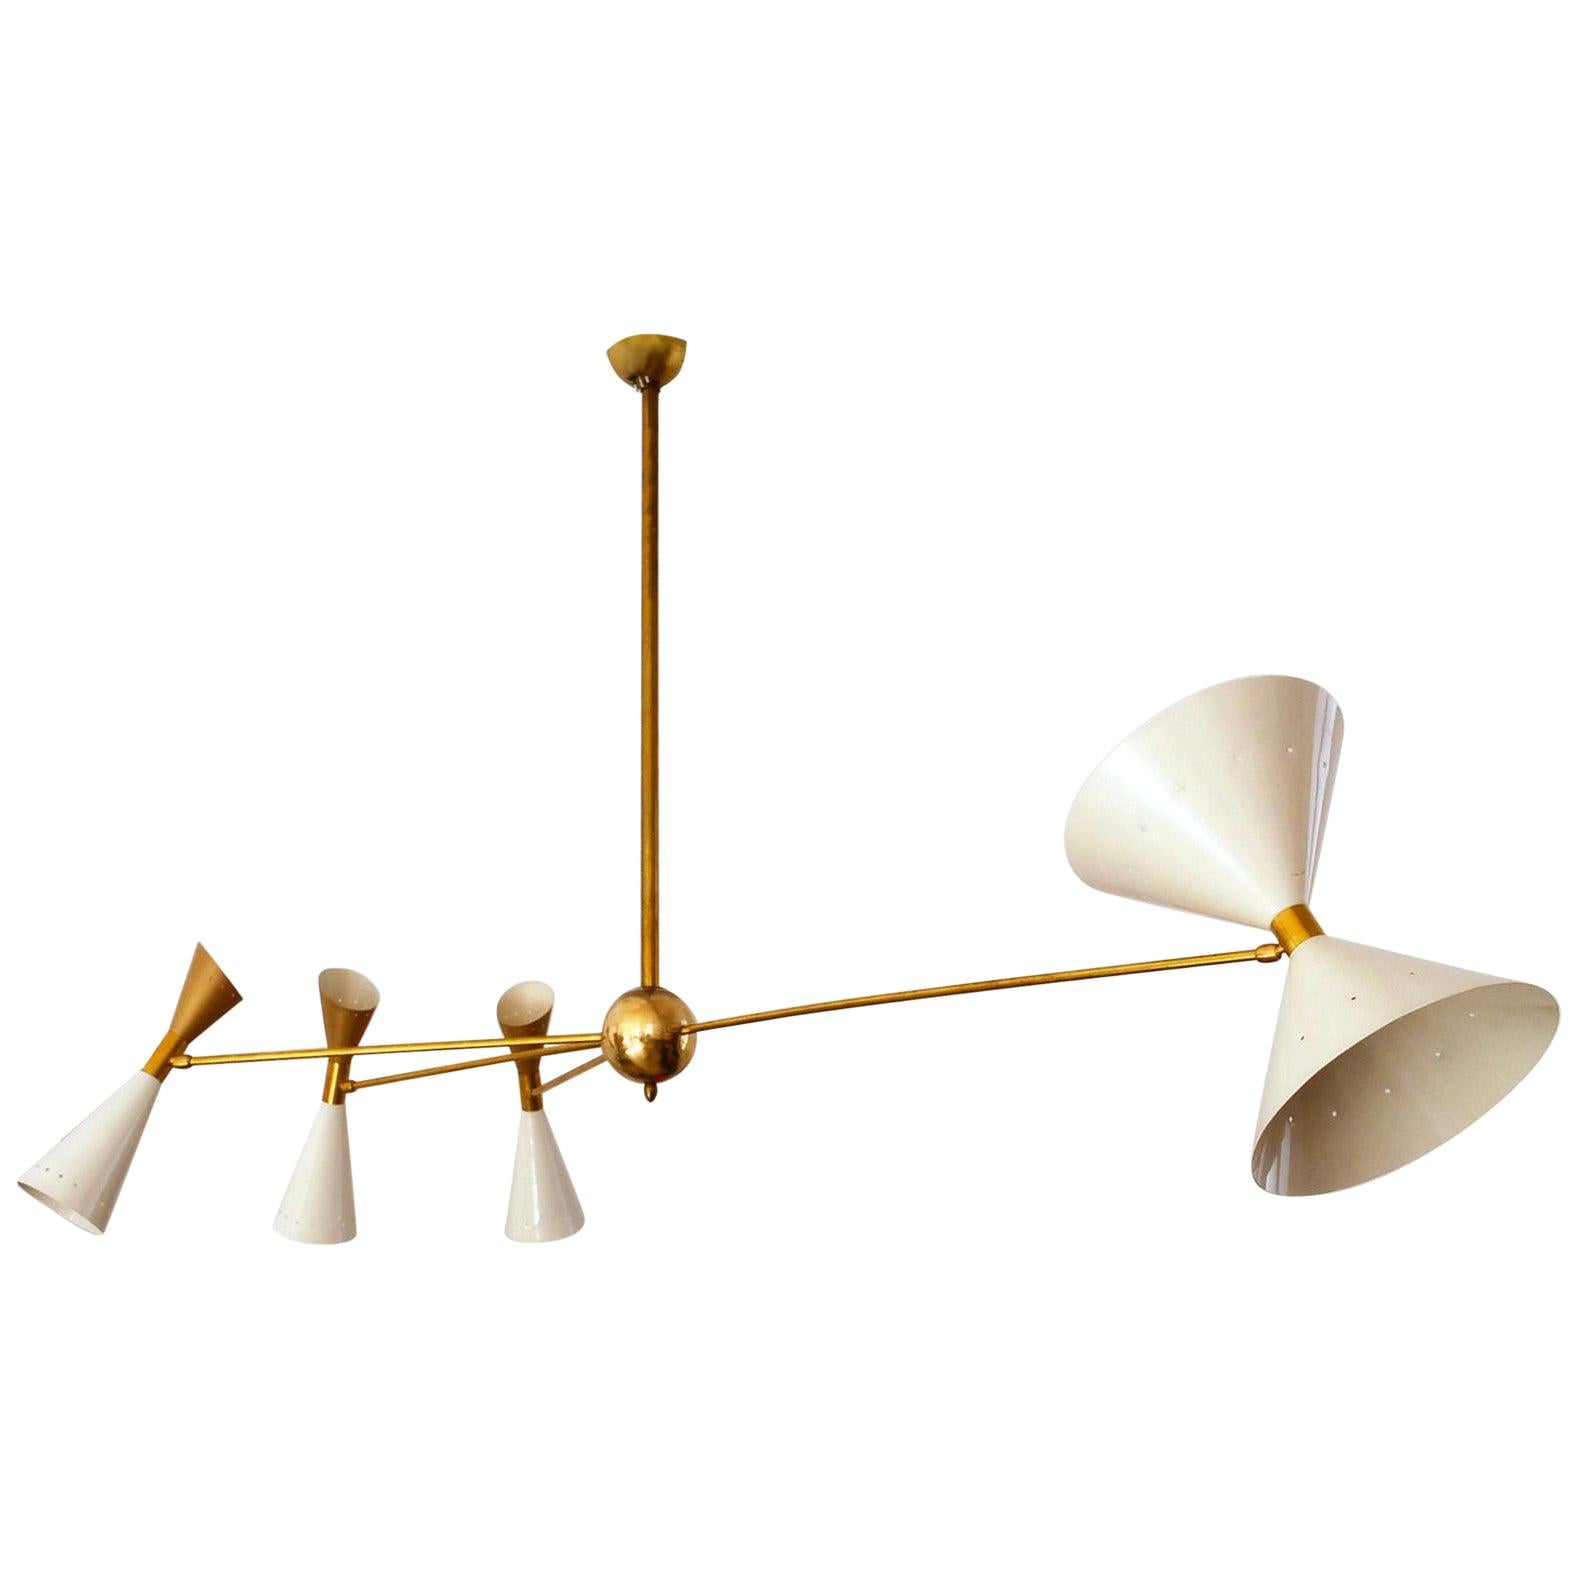 A captivating and innovative take on mid-century-inspired chandeliers, this design artfully plays with asymmetry in its arm combination. The result is a chandelier that pushes boundaries and adds intrigue to any space.
With its pivoting shades, this